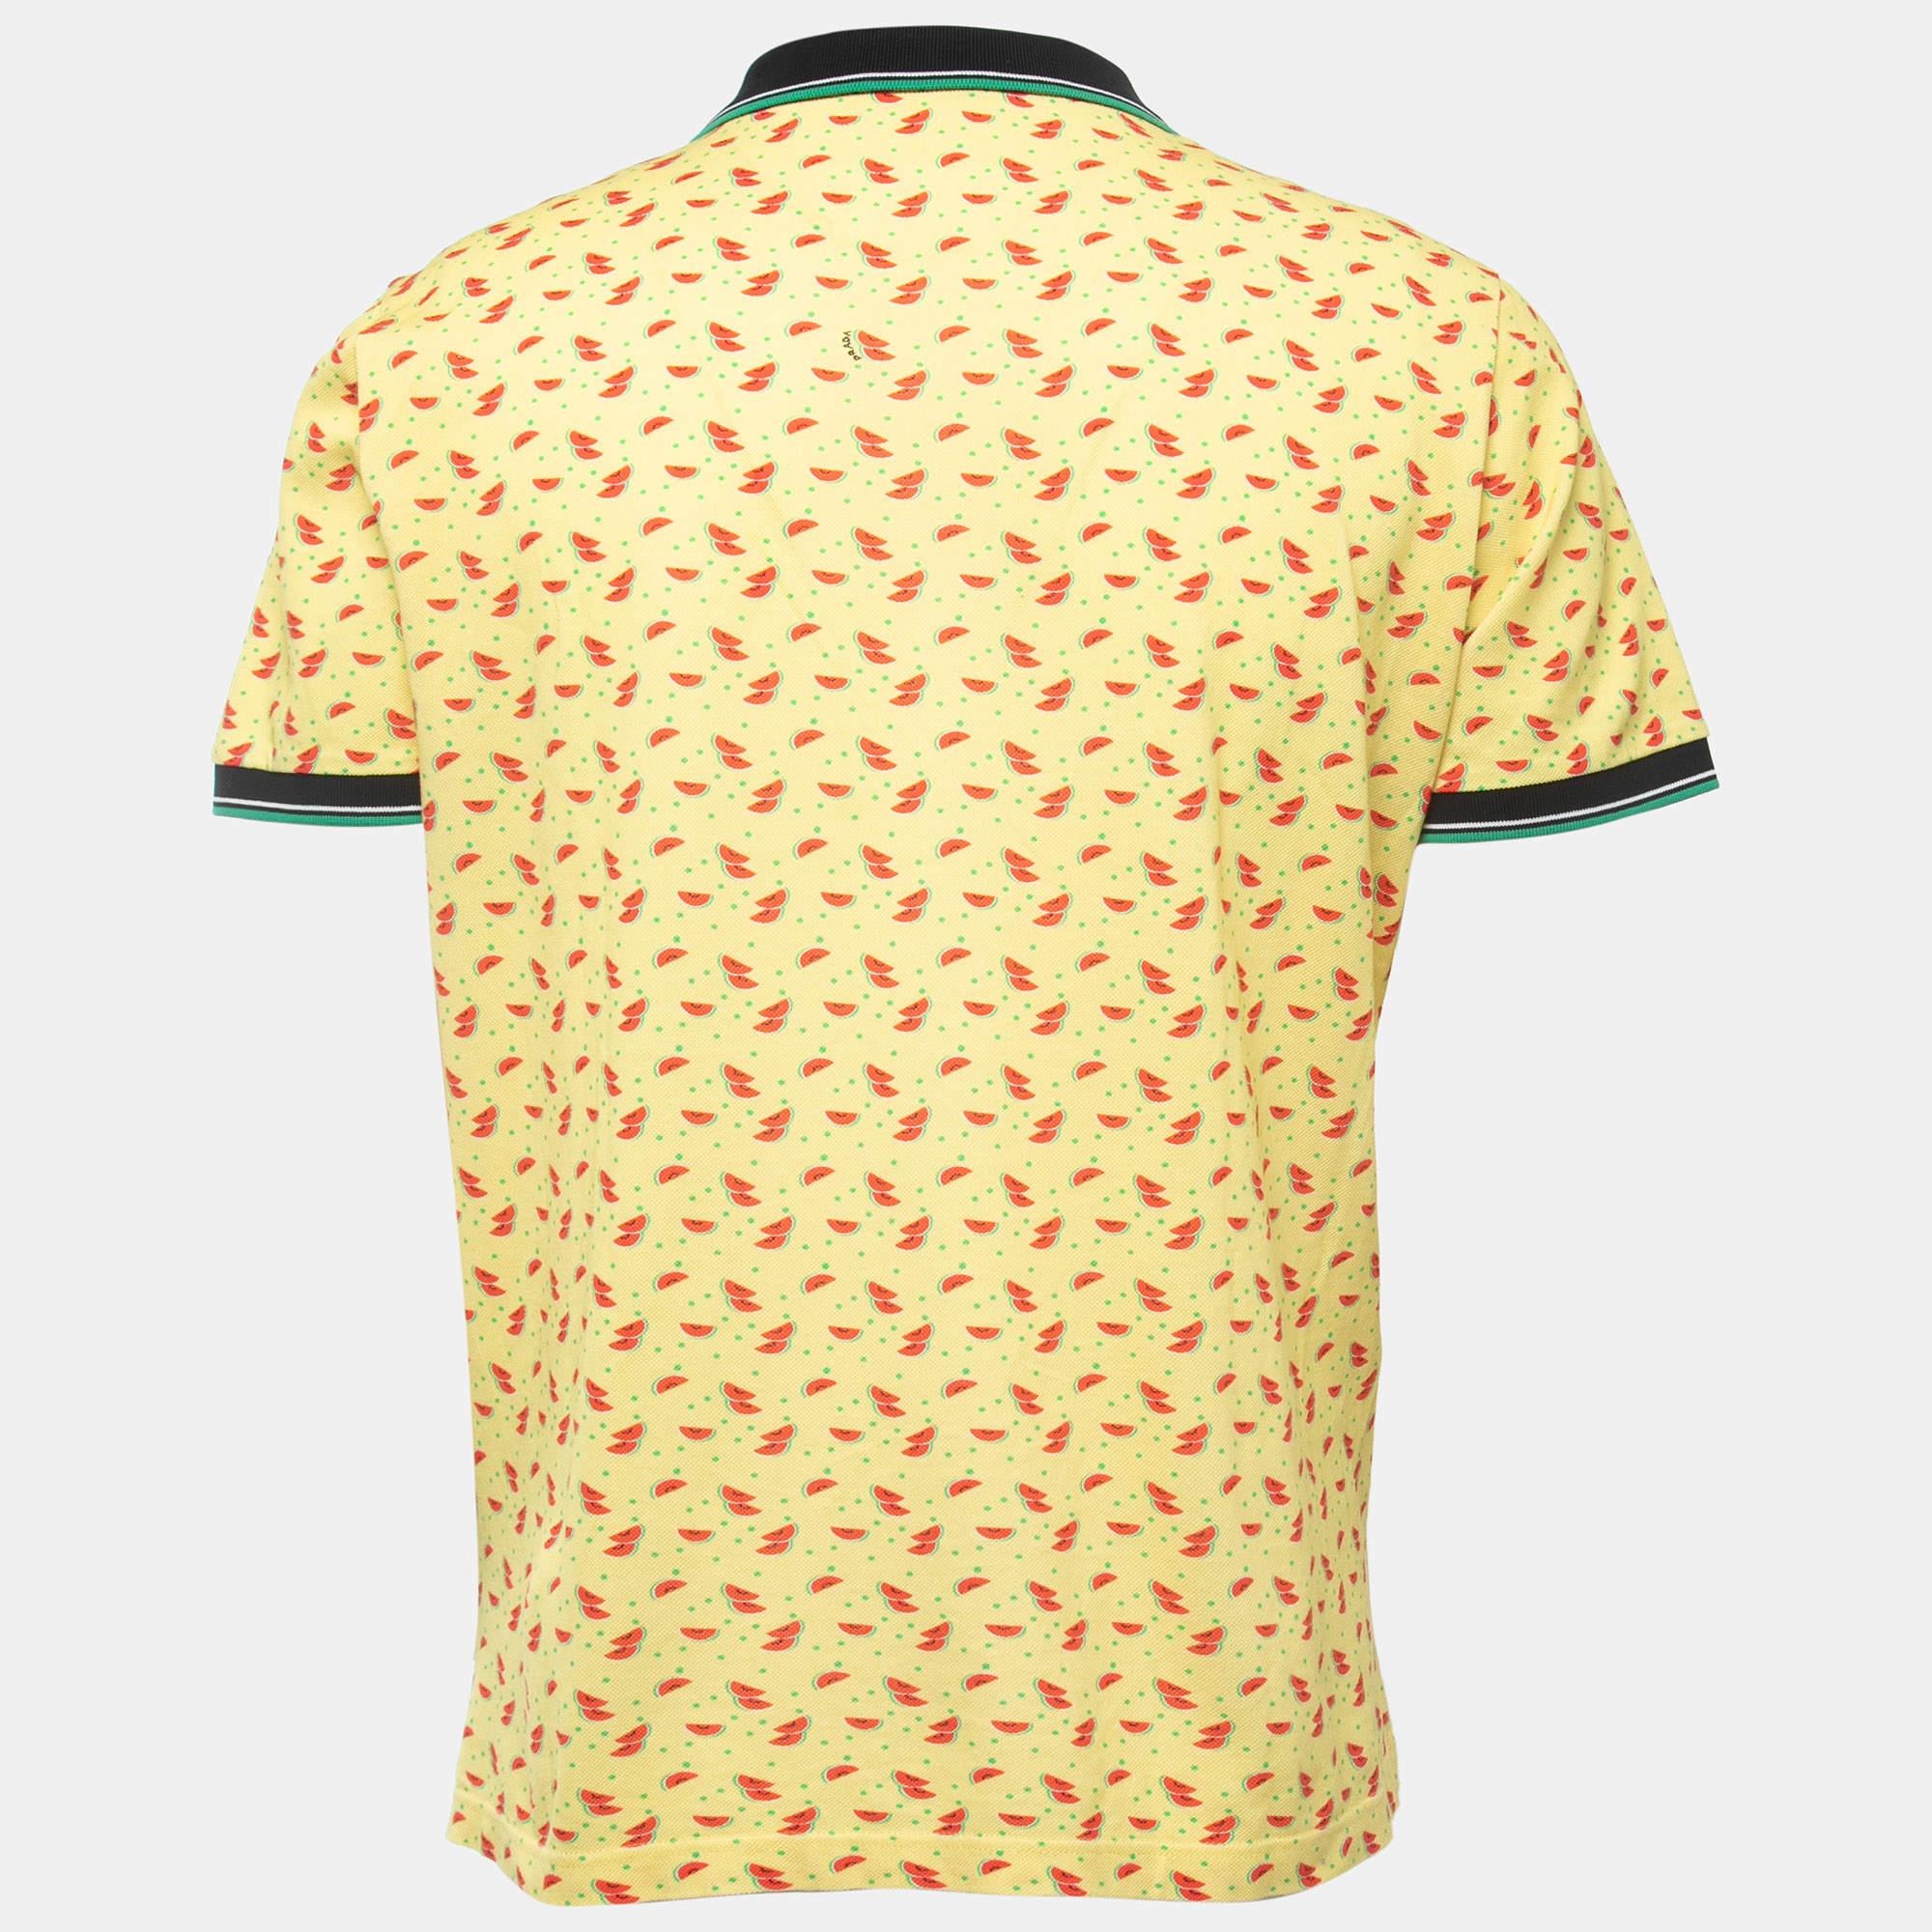 Prada's polo t-shirts have always been a classic pick for men. This iteration is tailored using cotton-piqué in a yellow hue and finished off with watermelon prints and a buttoned placket. Complete your casual look with a pair of shorts and